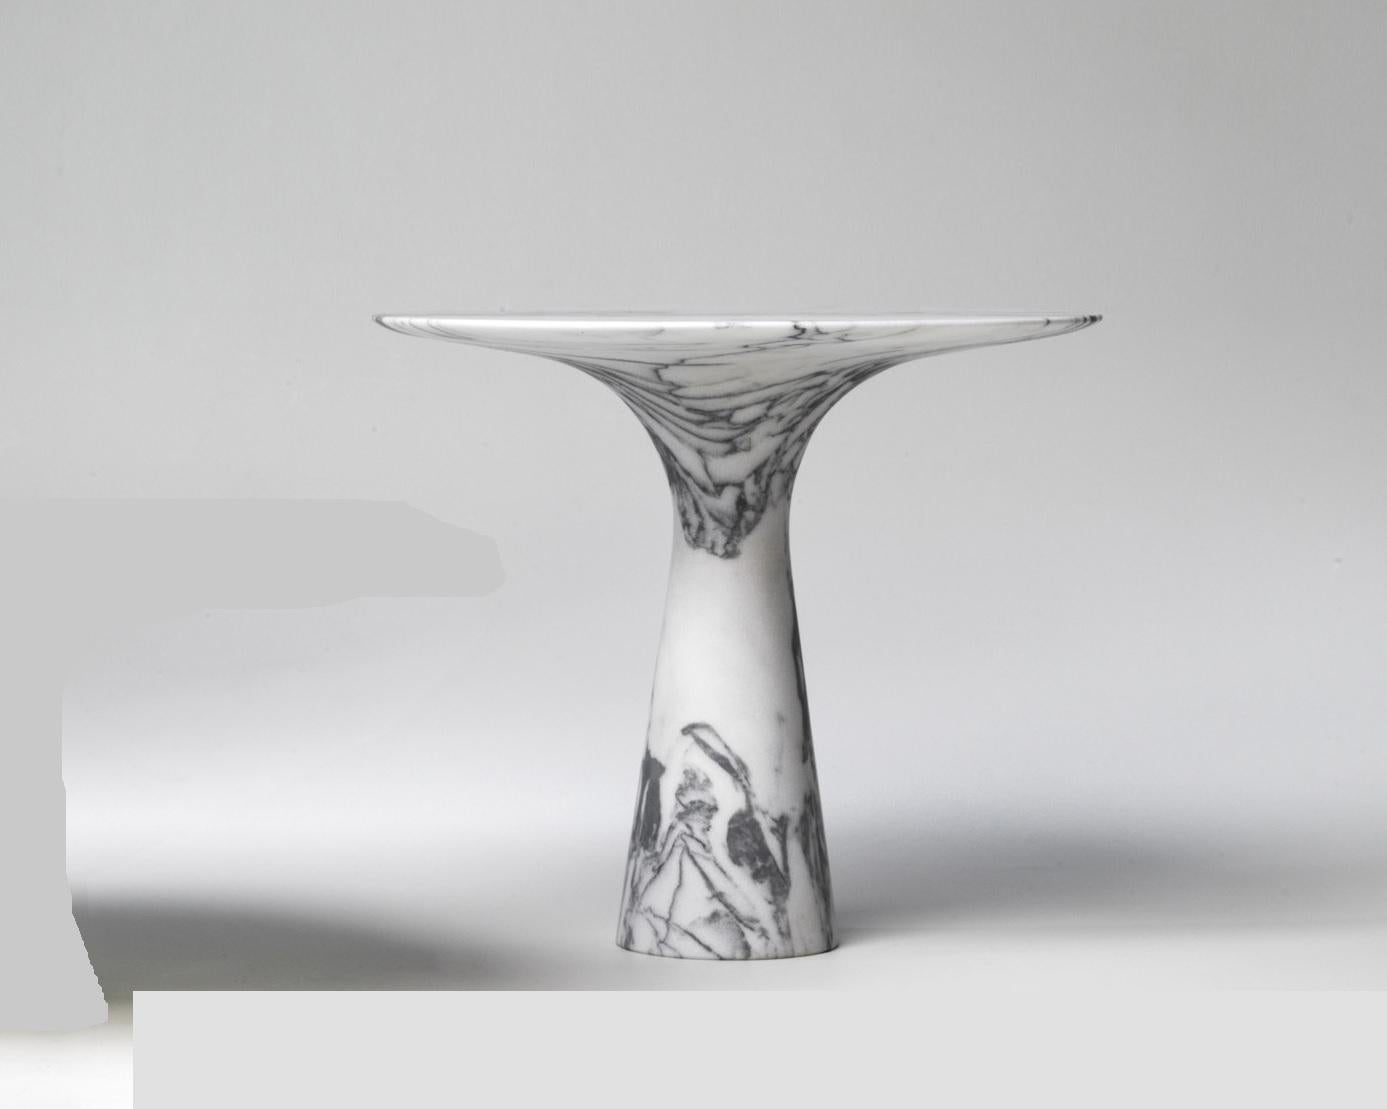 Refined Contemporary Marble 03 Bianco Statuarietto Marble Cake Stand
Signed by Leo Aerts.
Dimensions: diameter 26 x height 22.5 cm 
Material: Bianco Statuarietto Marble
Technique: polished, carved. 
Available in marble: Kyknos, Bianco